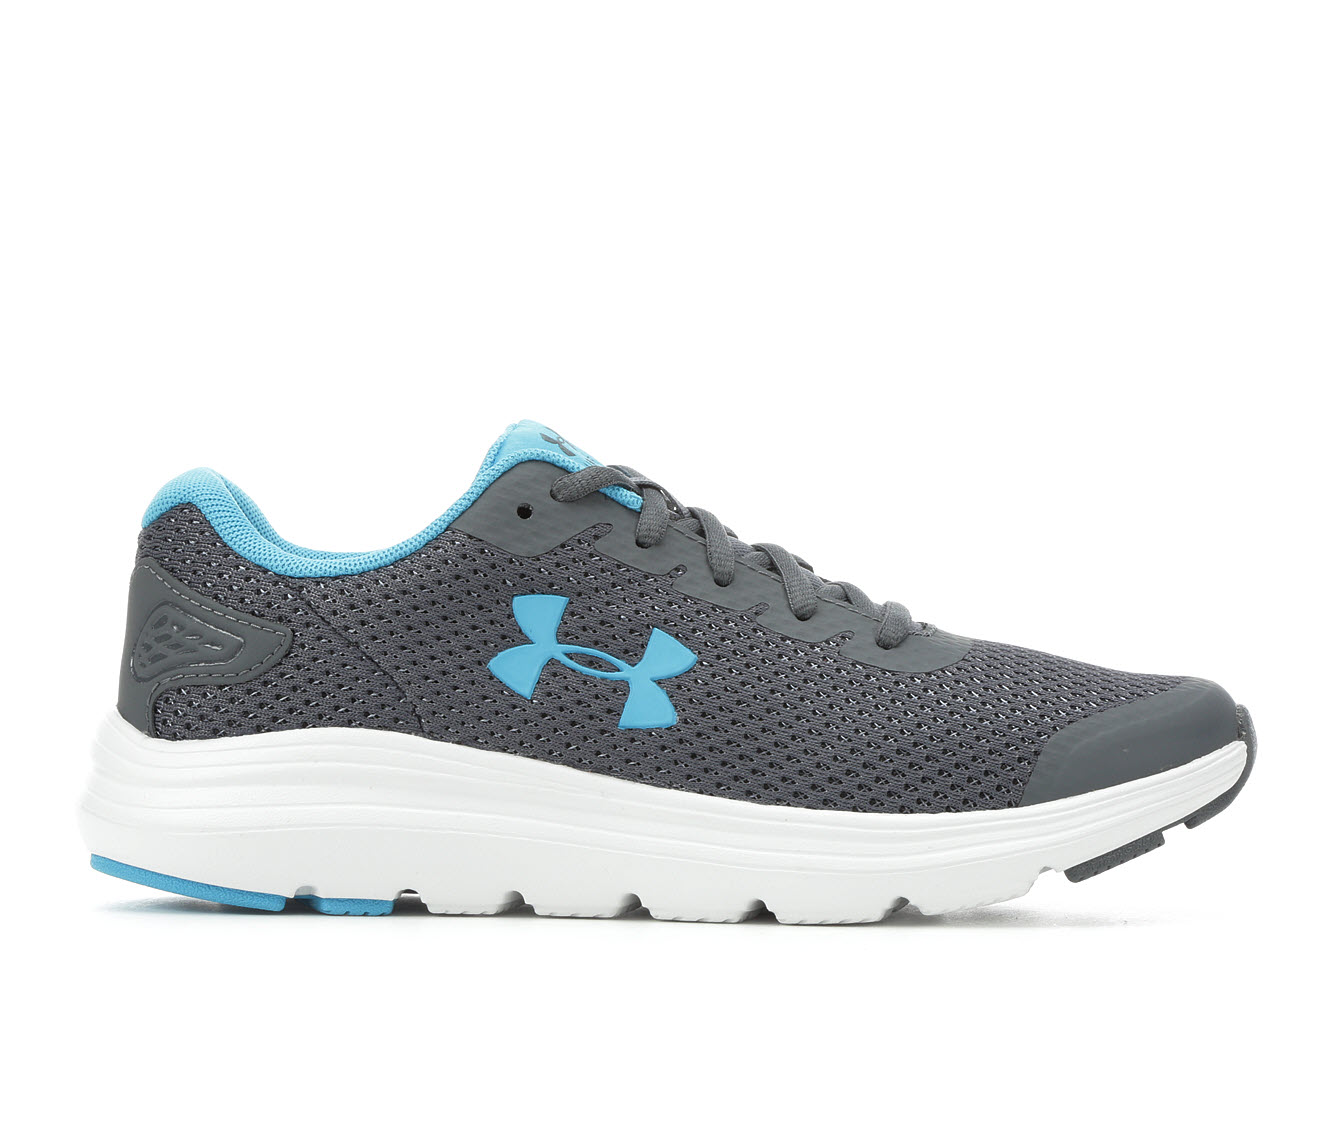 Women's Under Armour Surge 2 Running Shoes